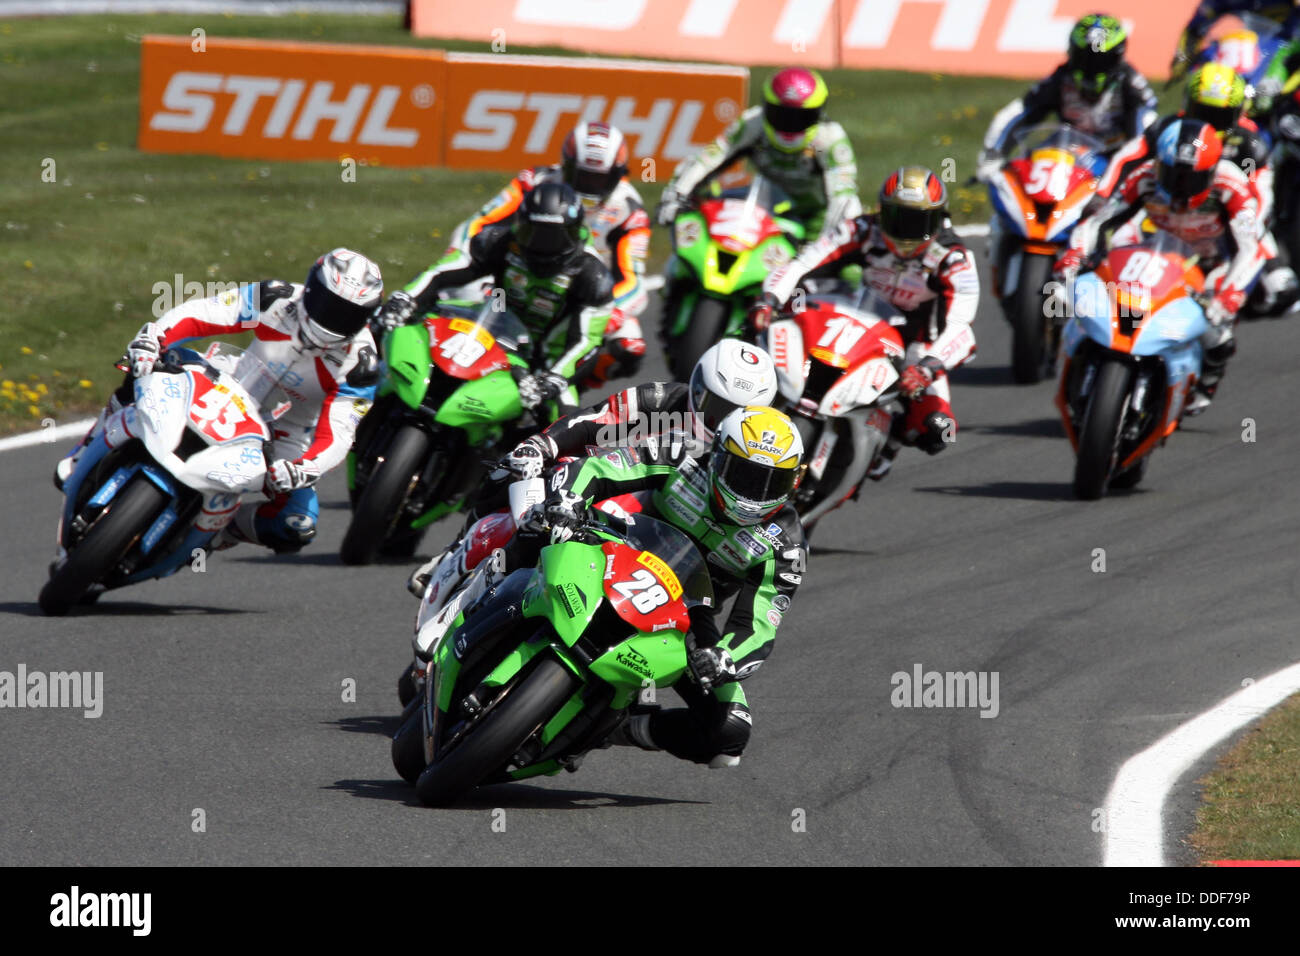 Start of the Superstock race, Oulton Park, 2013 British Superbike Championship Stock Photo